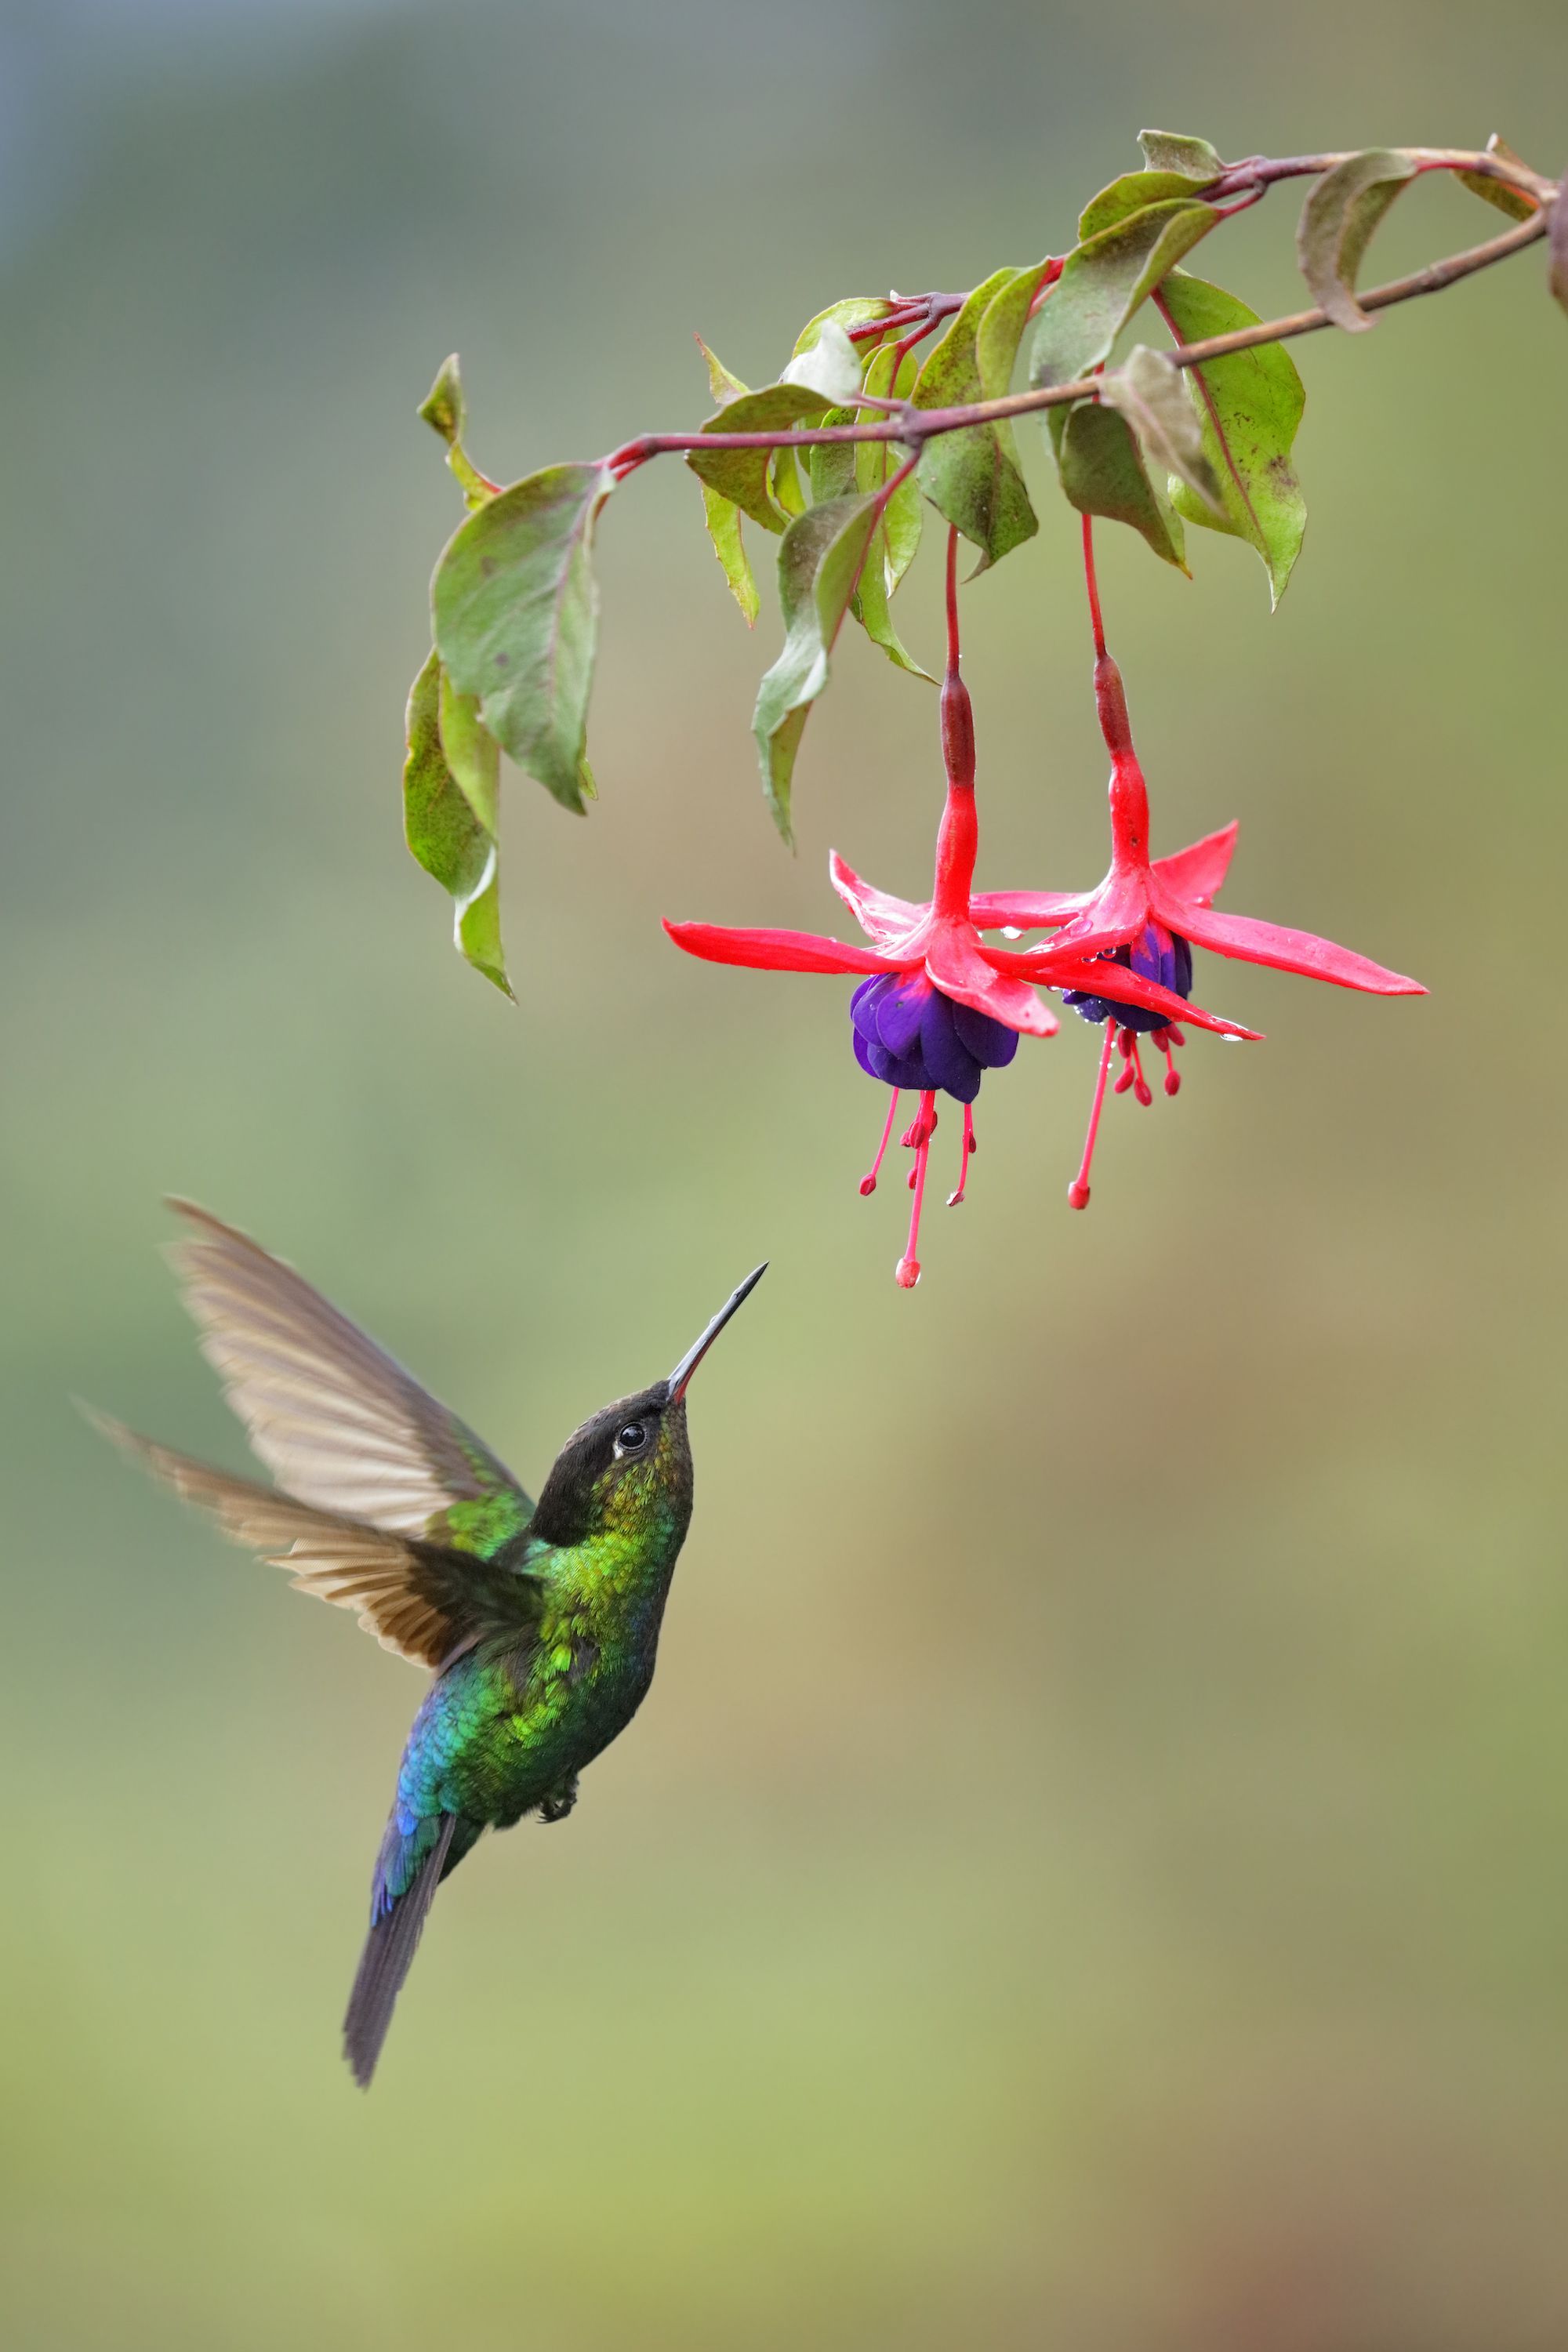 15 Hummingbirds Facts - How to Attract Hummingbirds